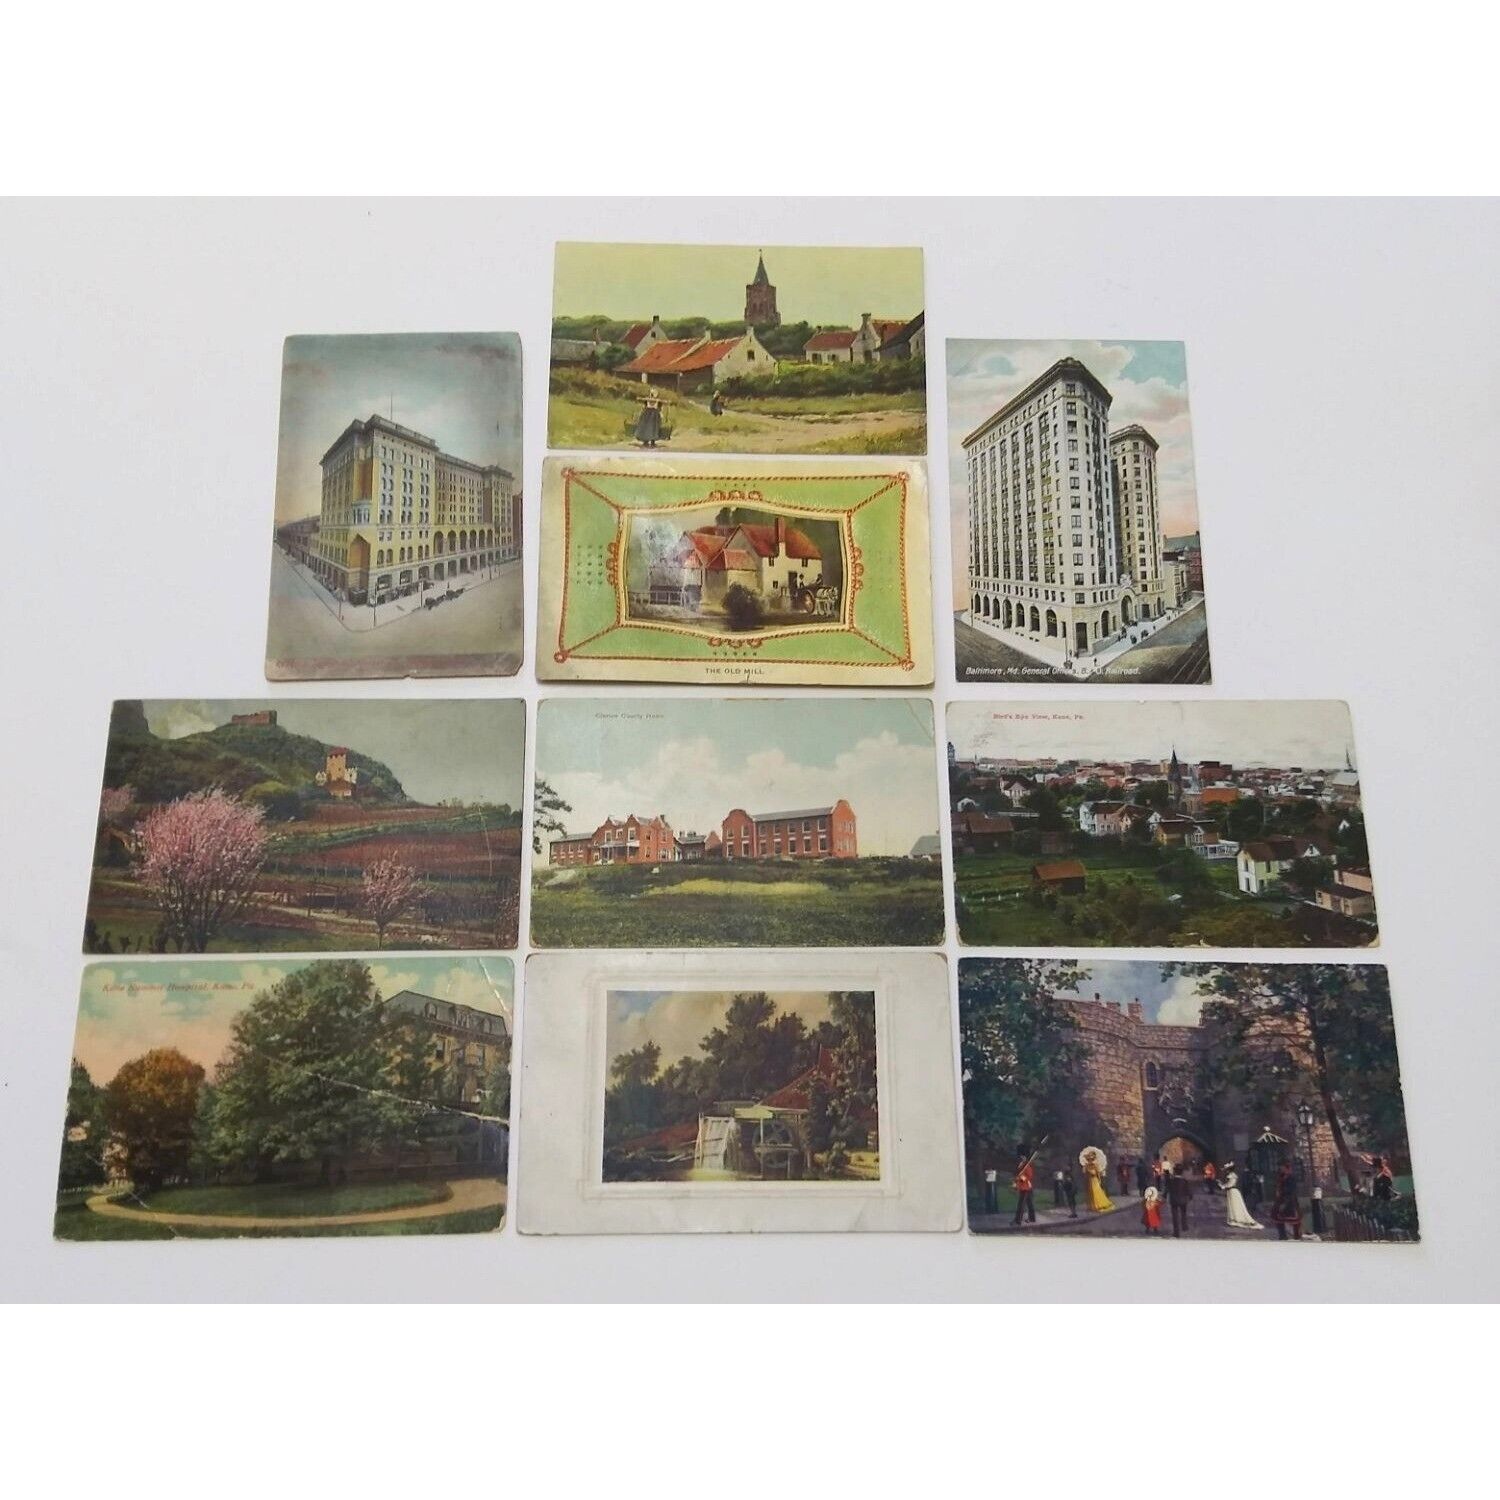 10 Architectural Picture Postcards General Greetings Posted Unposted Early 1900s